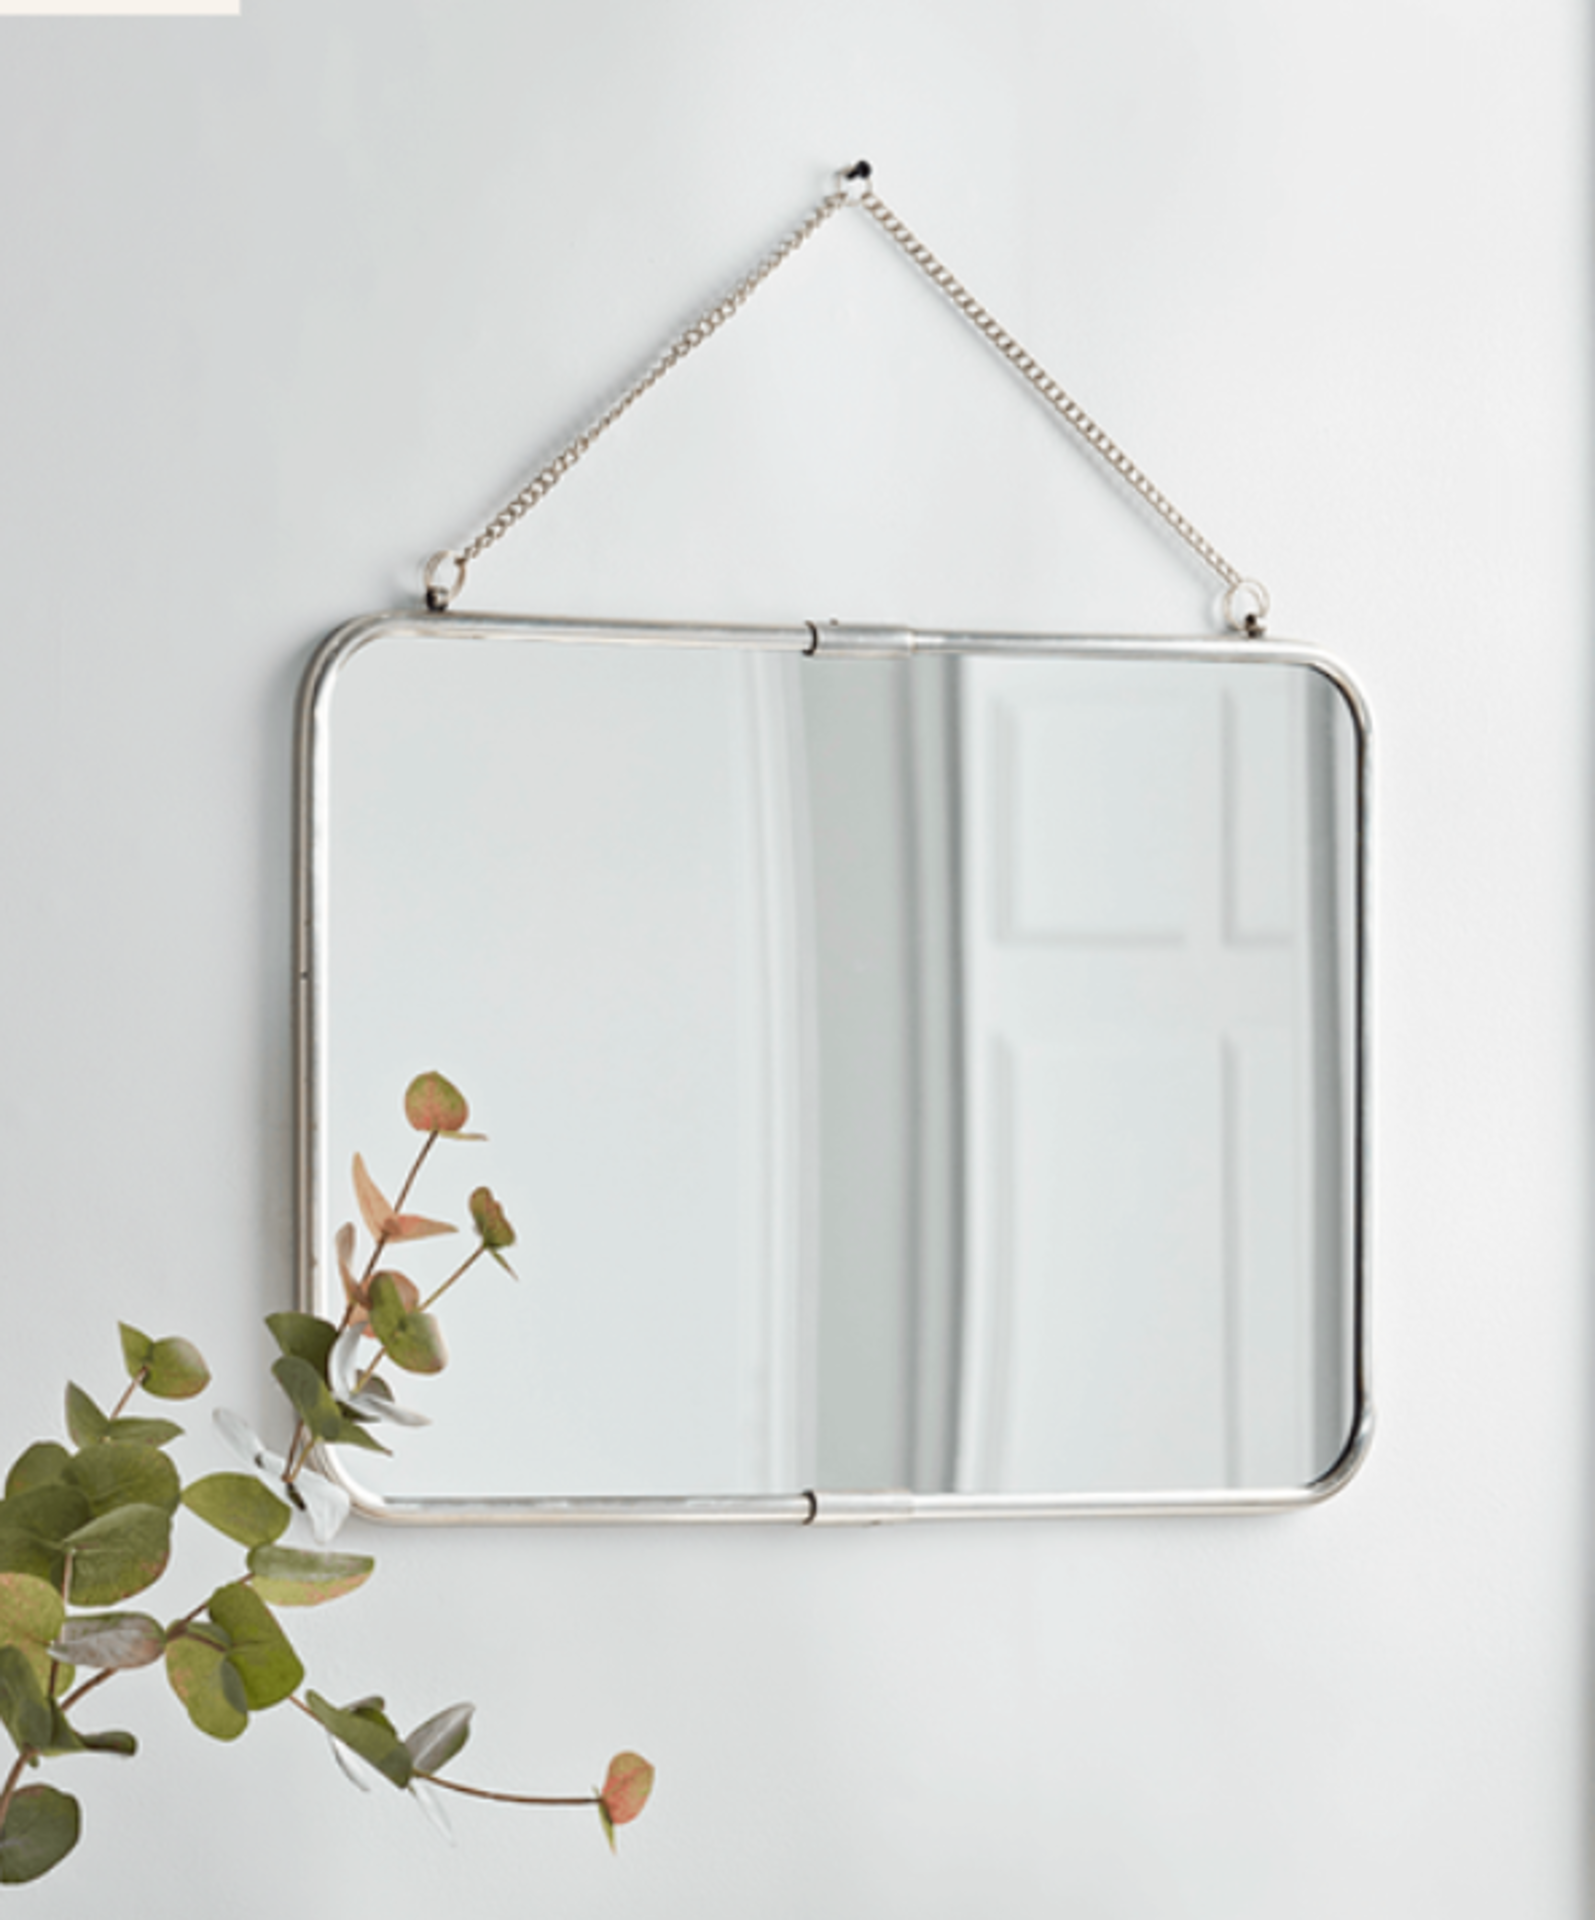 French Hanging Mirror - Antique Silver. RRP £155.00. Feminine and French in style, with a dainty